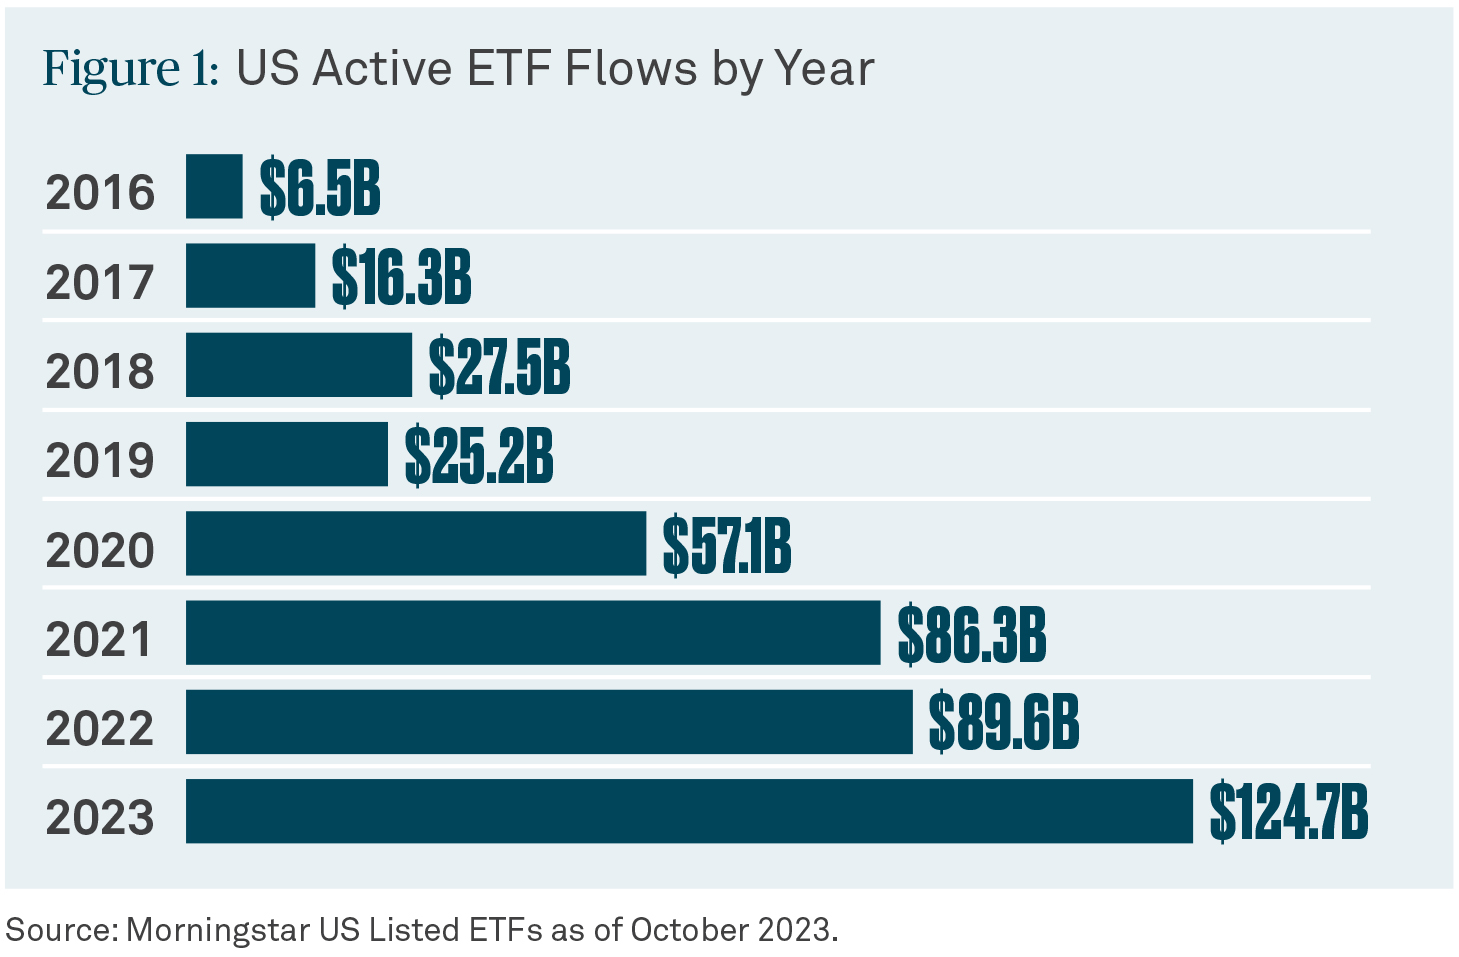 US active etf flows by year